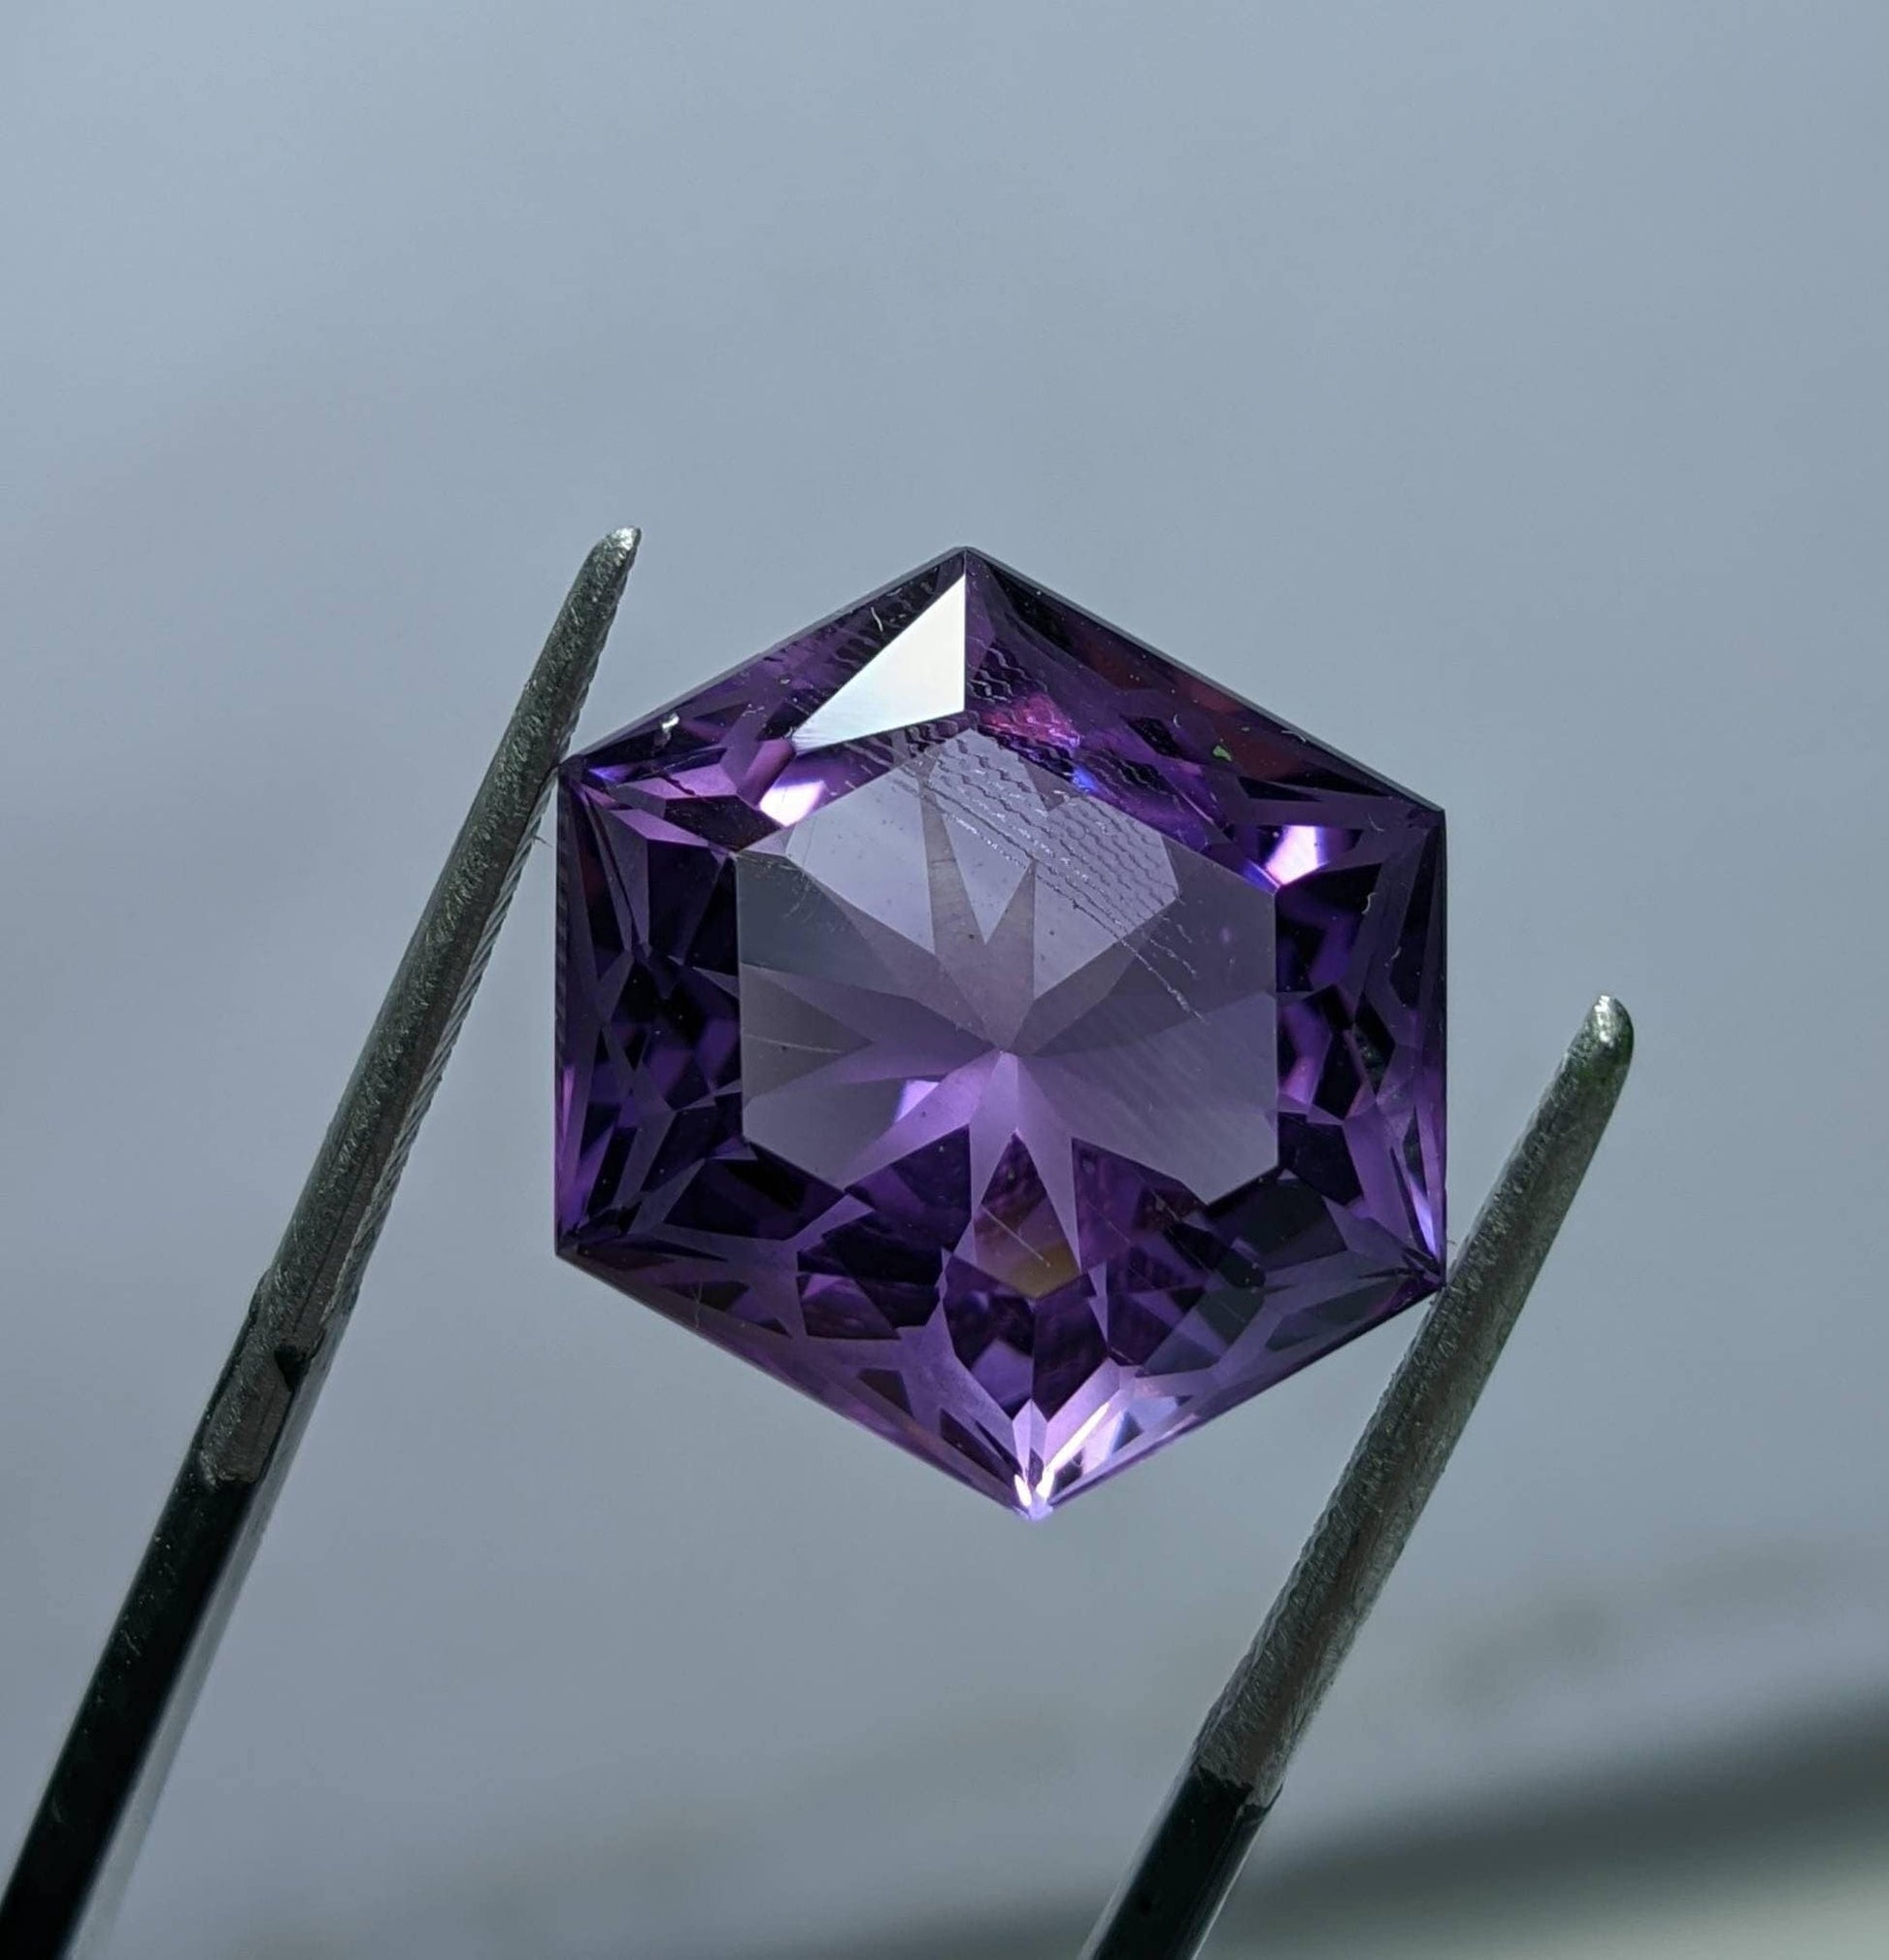 ARSAA GEMS AND MINERALSNatural fine quality beautiful 10 carats deep purple color AAA clarity faceted amethyst gem - Premium  from ARSAA GEMS AND MINERALS - Just $20.00! Shop now at ARSAA GEMS AND MINERALS